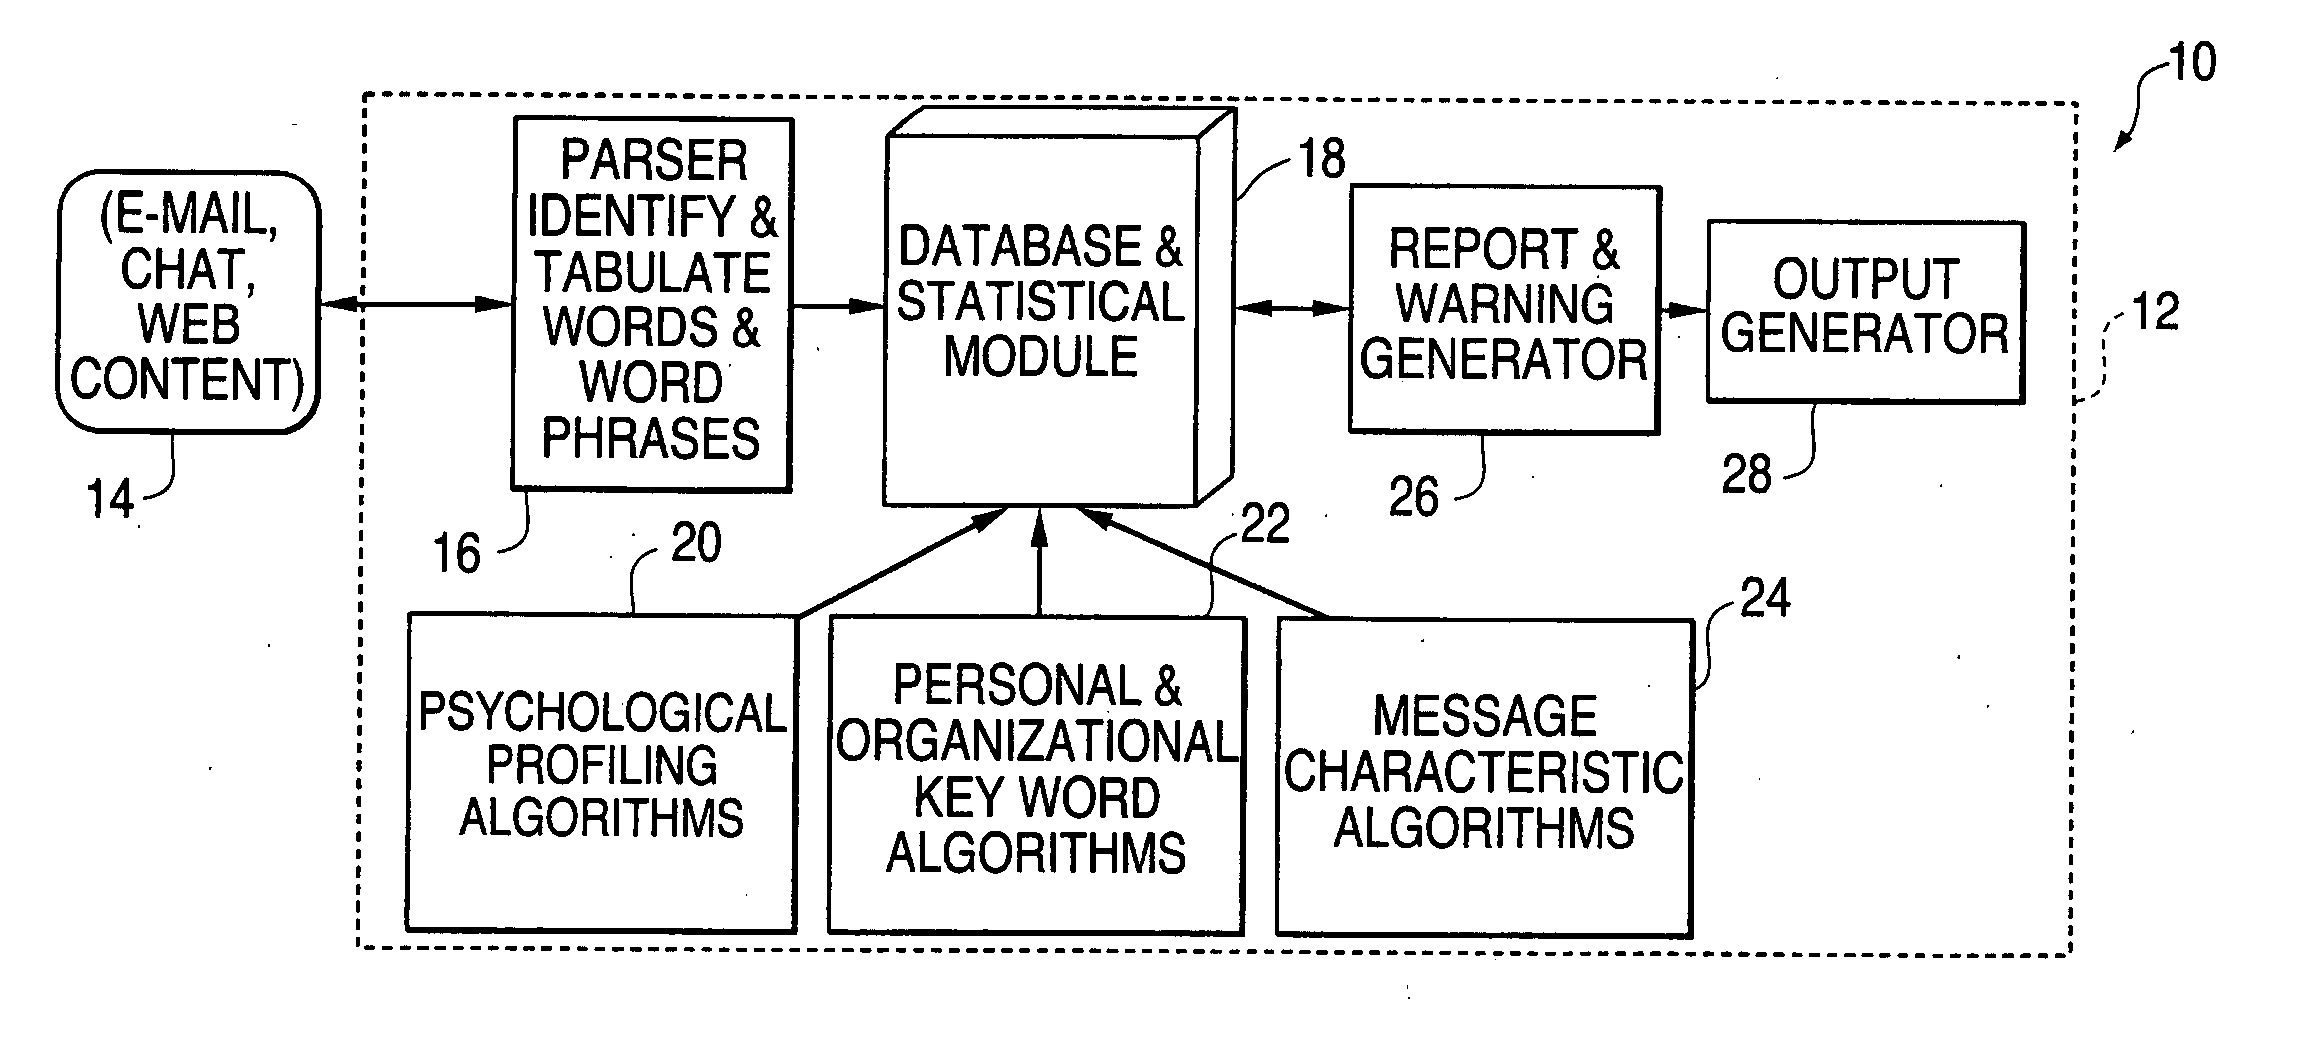 System and method for computer analysis of computer generated communications to produce indications and warning of dangerous behavior